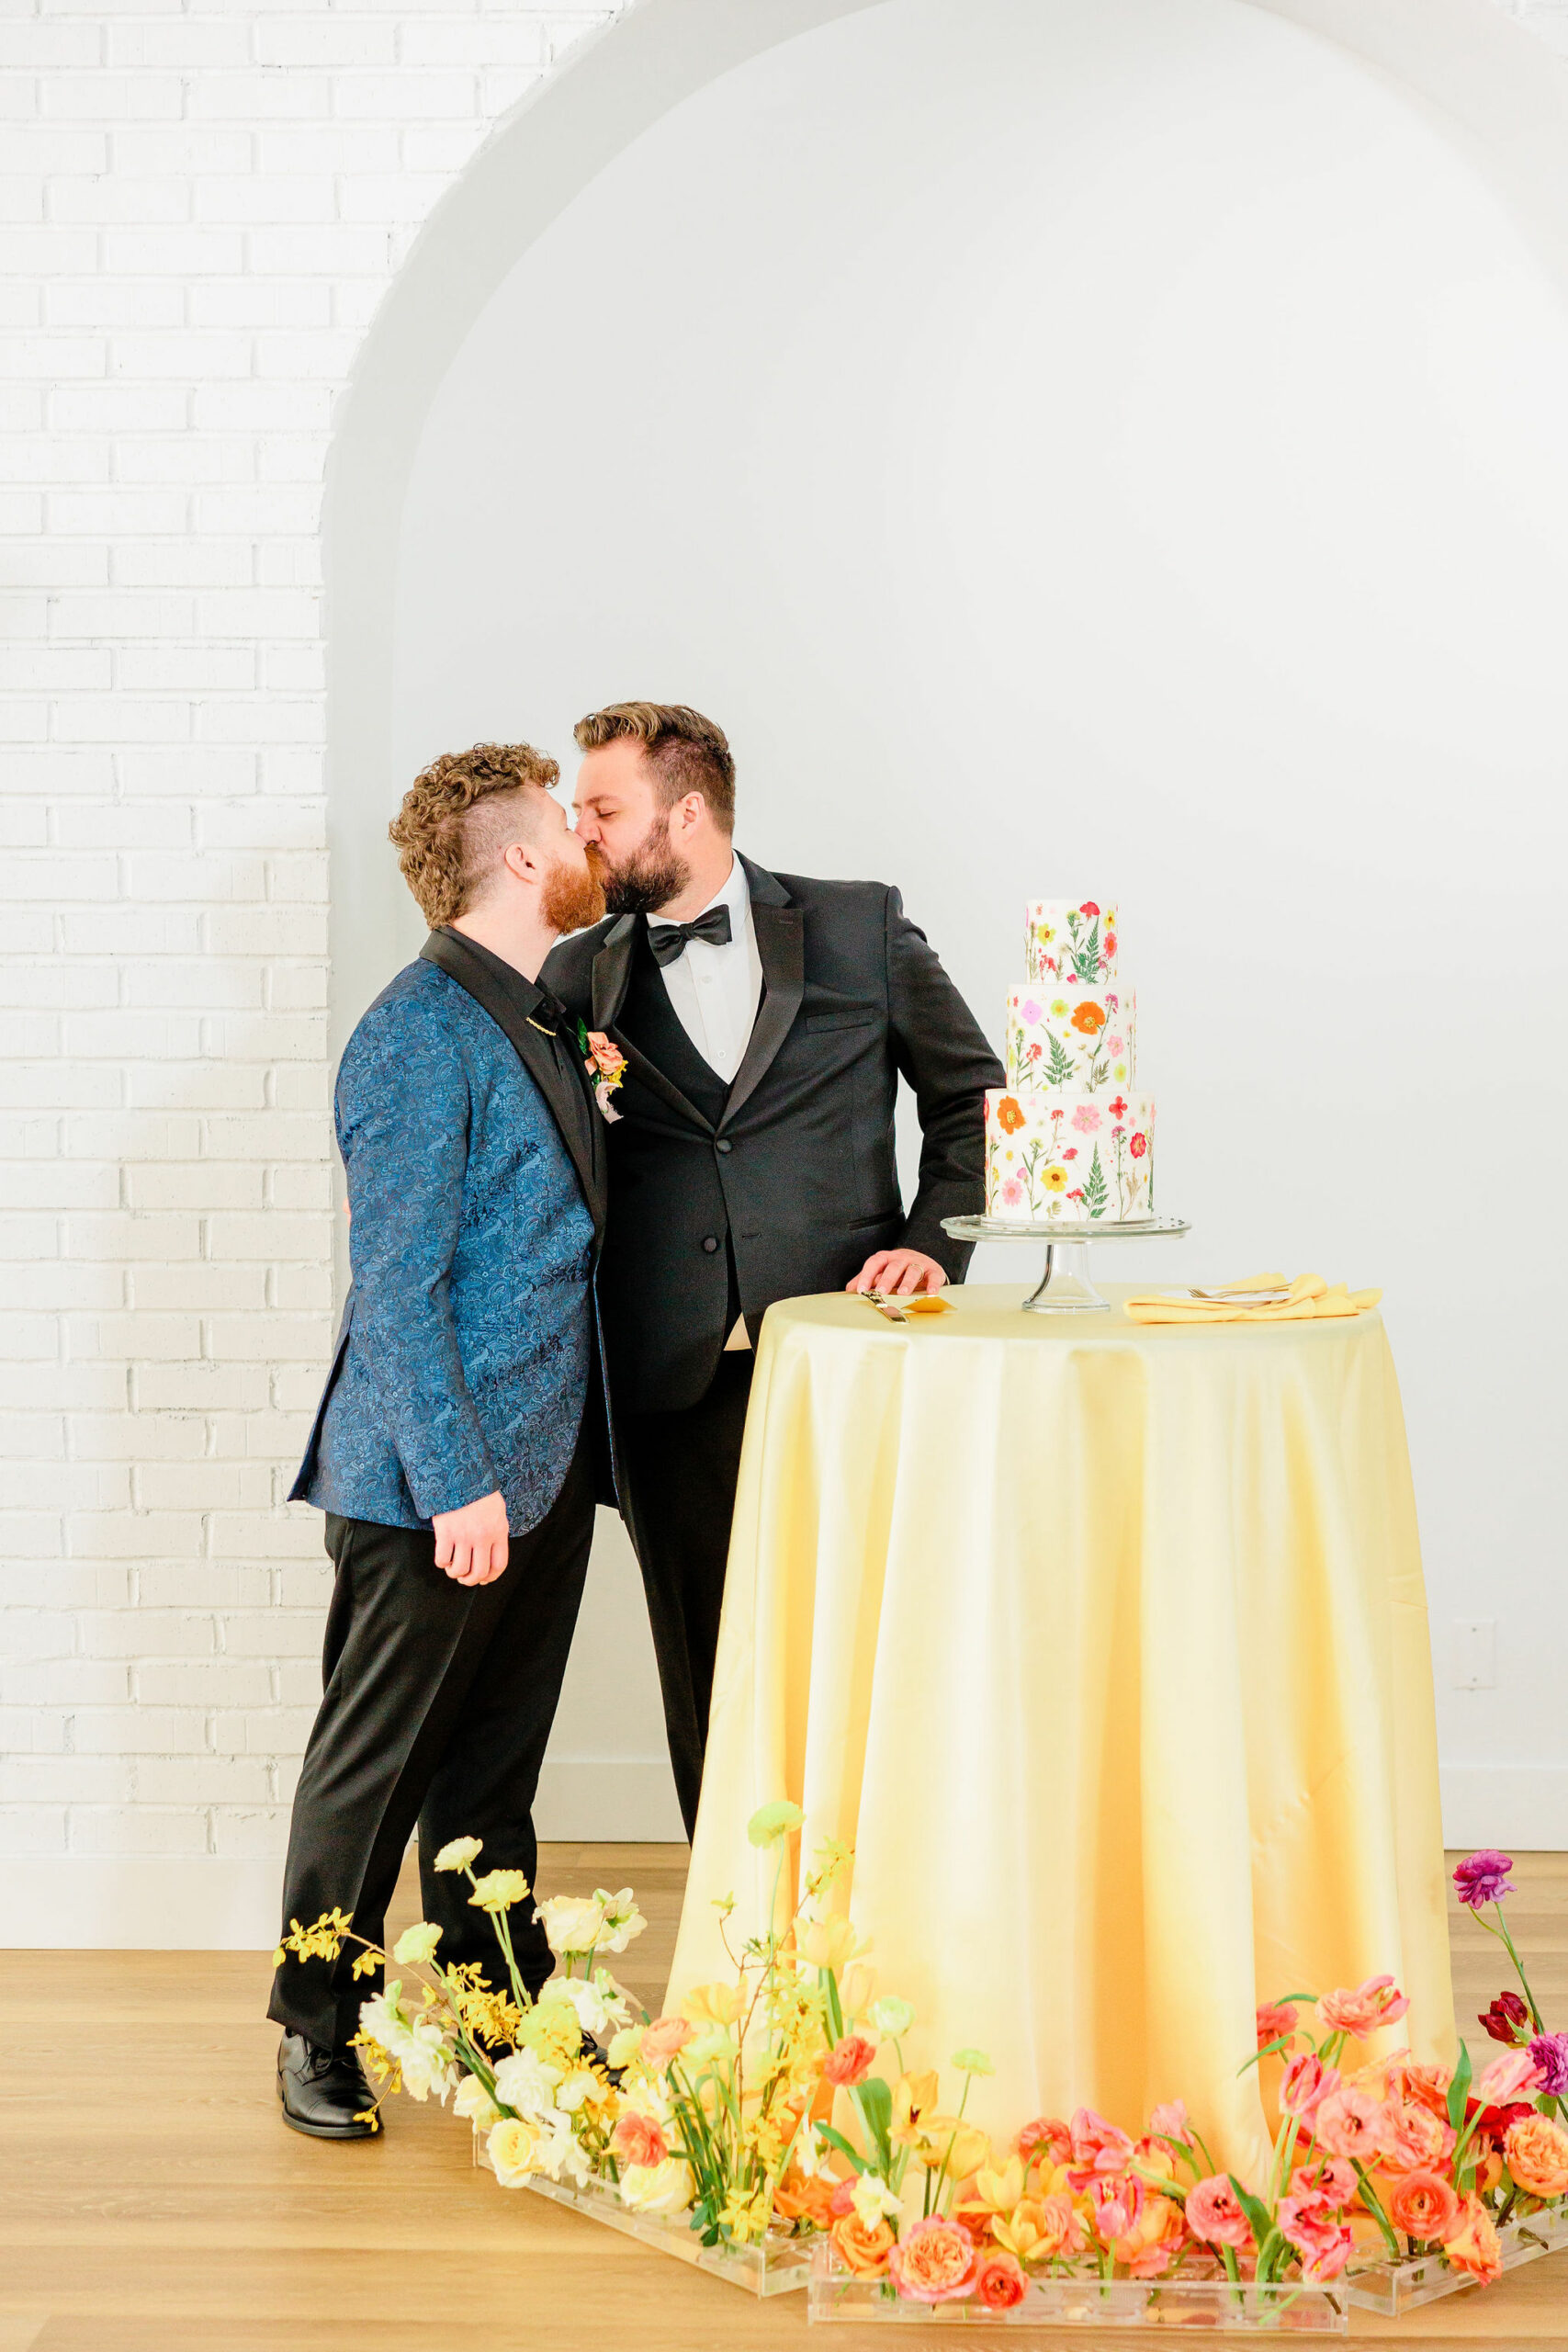 Couple kisses next to unique wedding cake with pressed flowers in shades of pink, orange, purple, yellow, and green. Nontraditional wedding cakes unique cake inspiration #2024weddingtrends #Utaheventplanner #luxuryeventplanner #weddingtrends #weddingideas